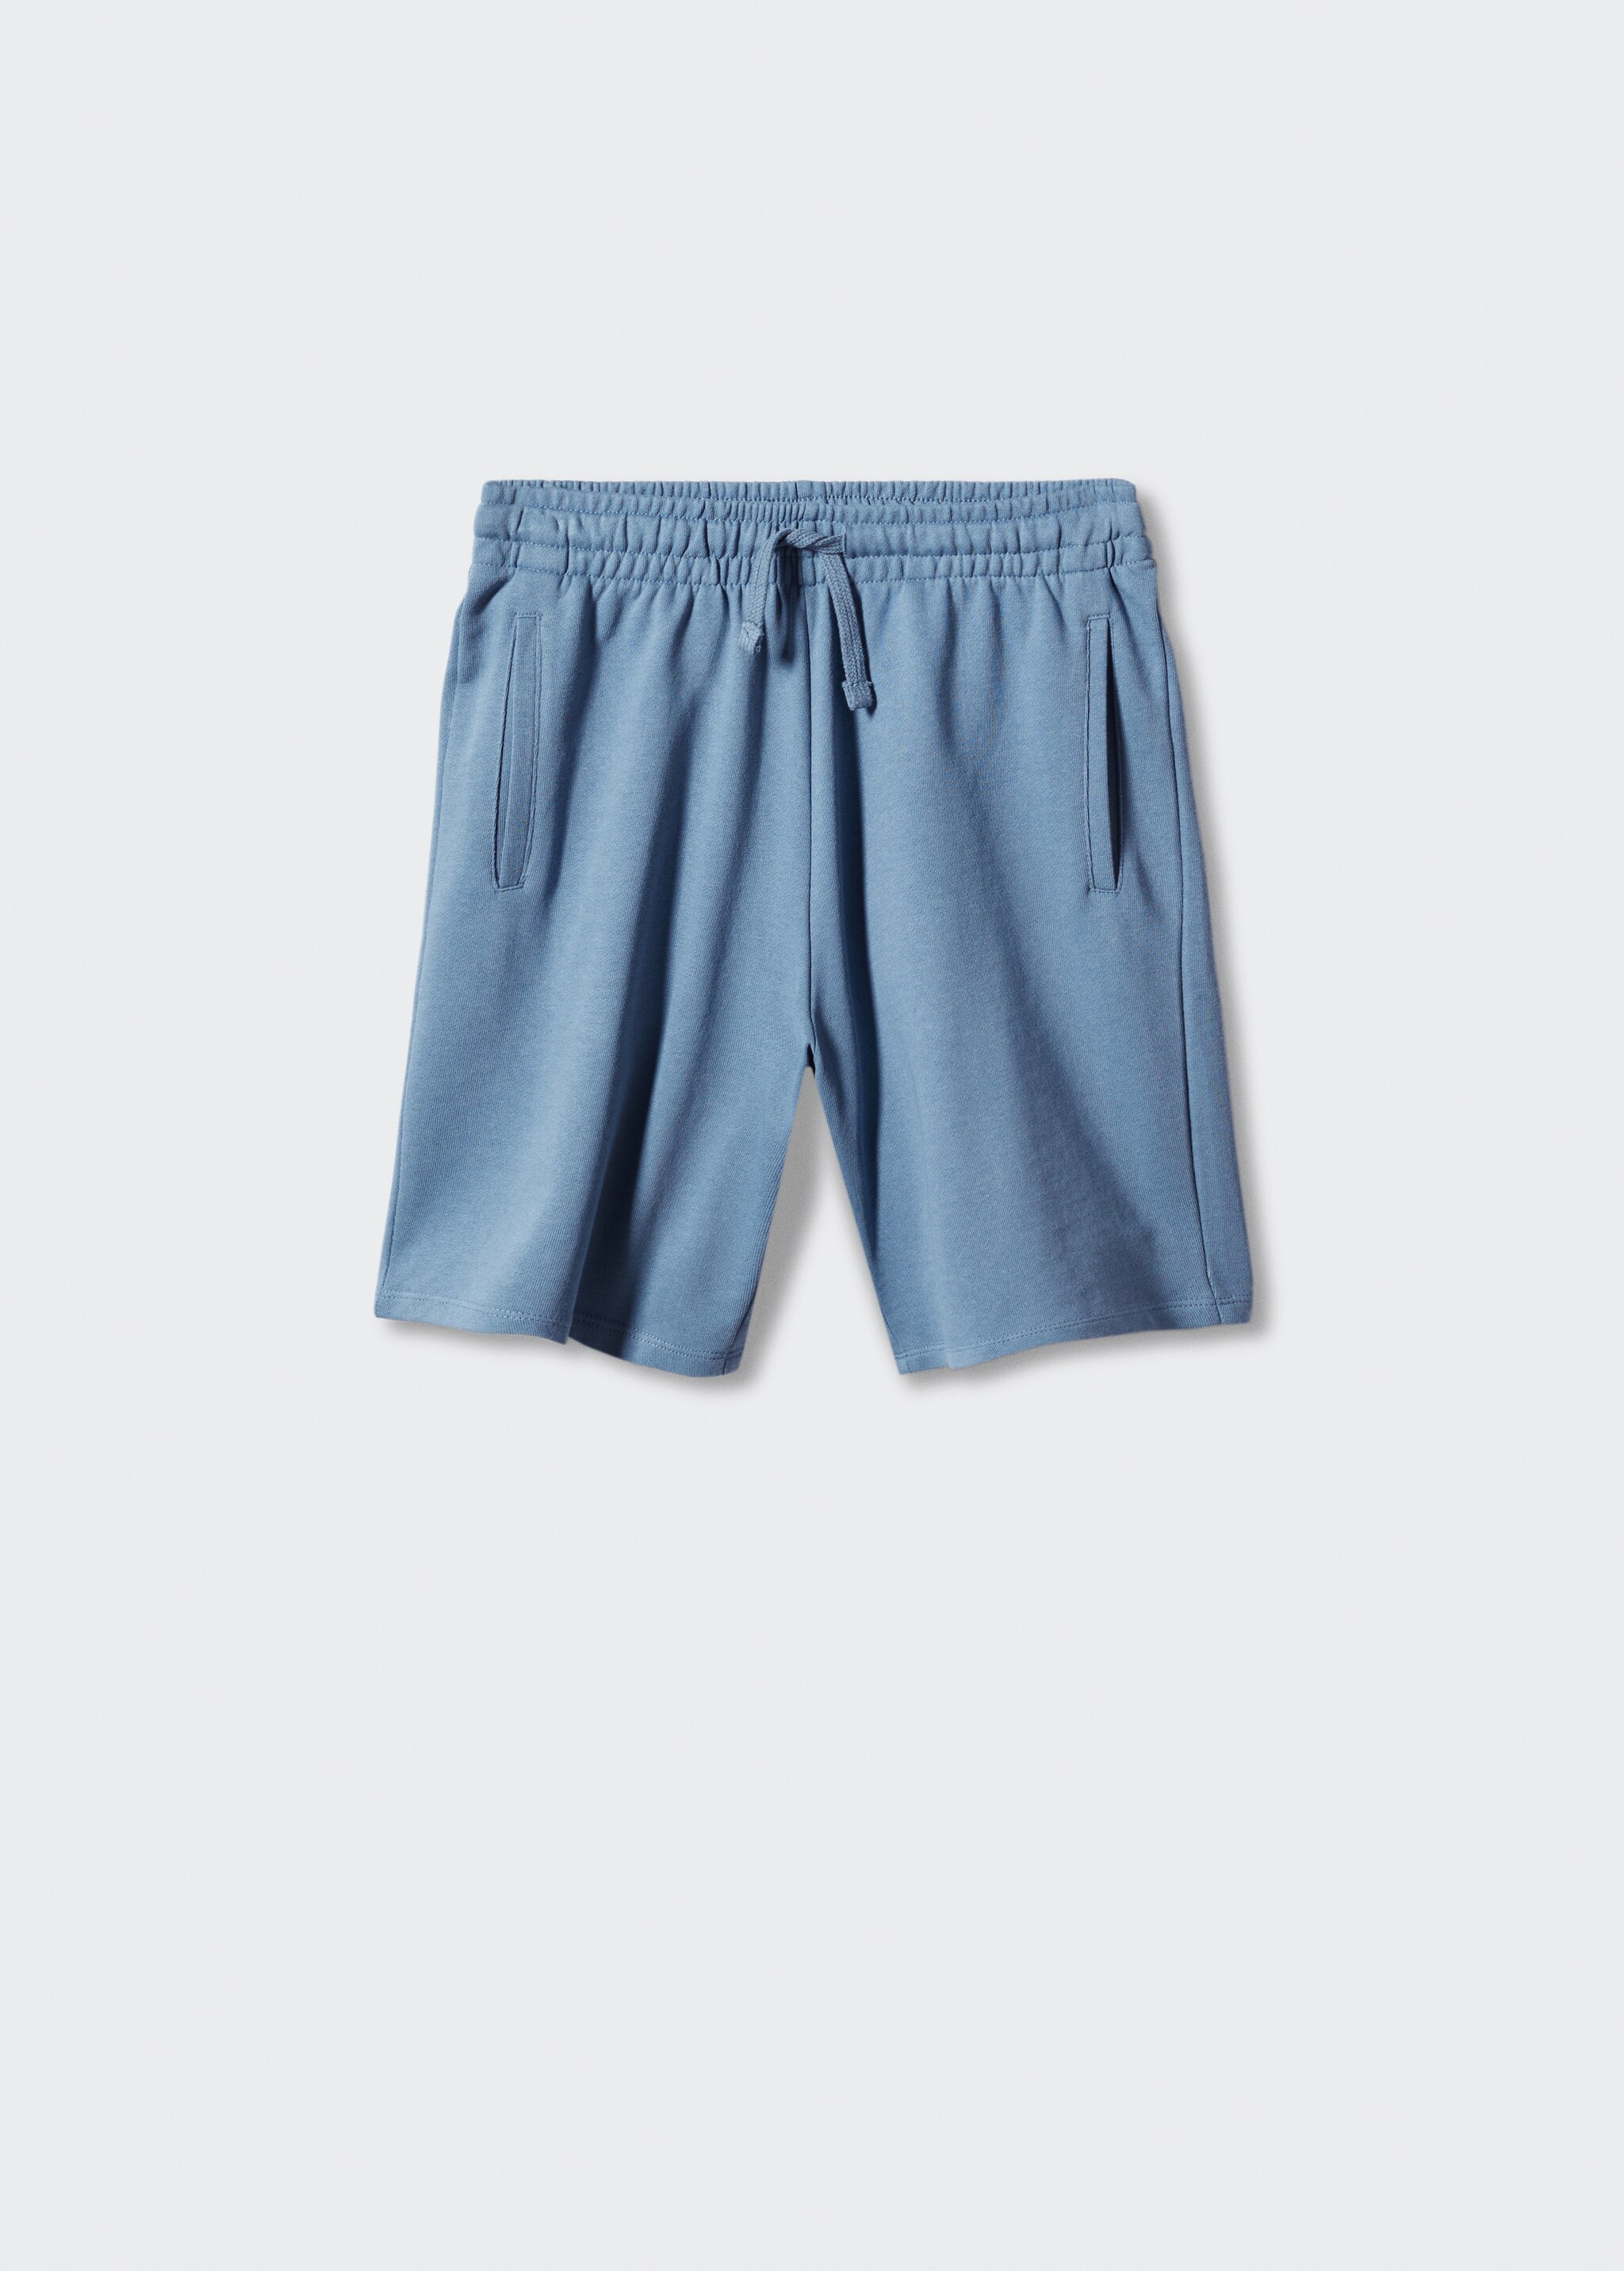 Cotton jogging Bermuda shorts - Article without model